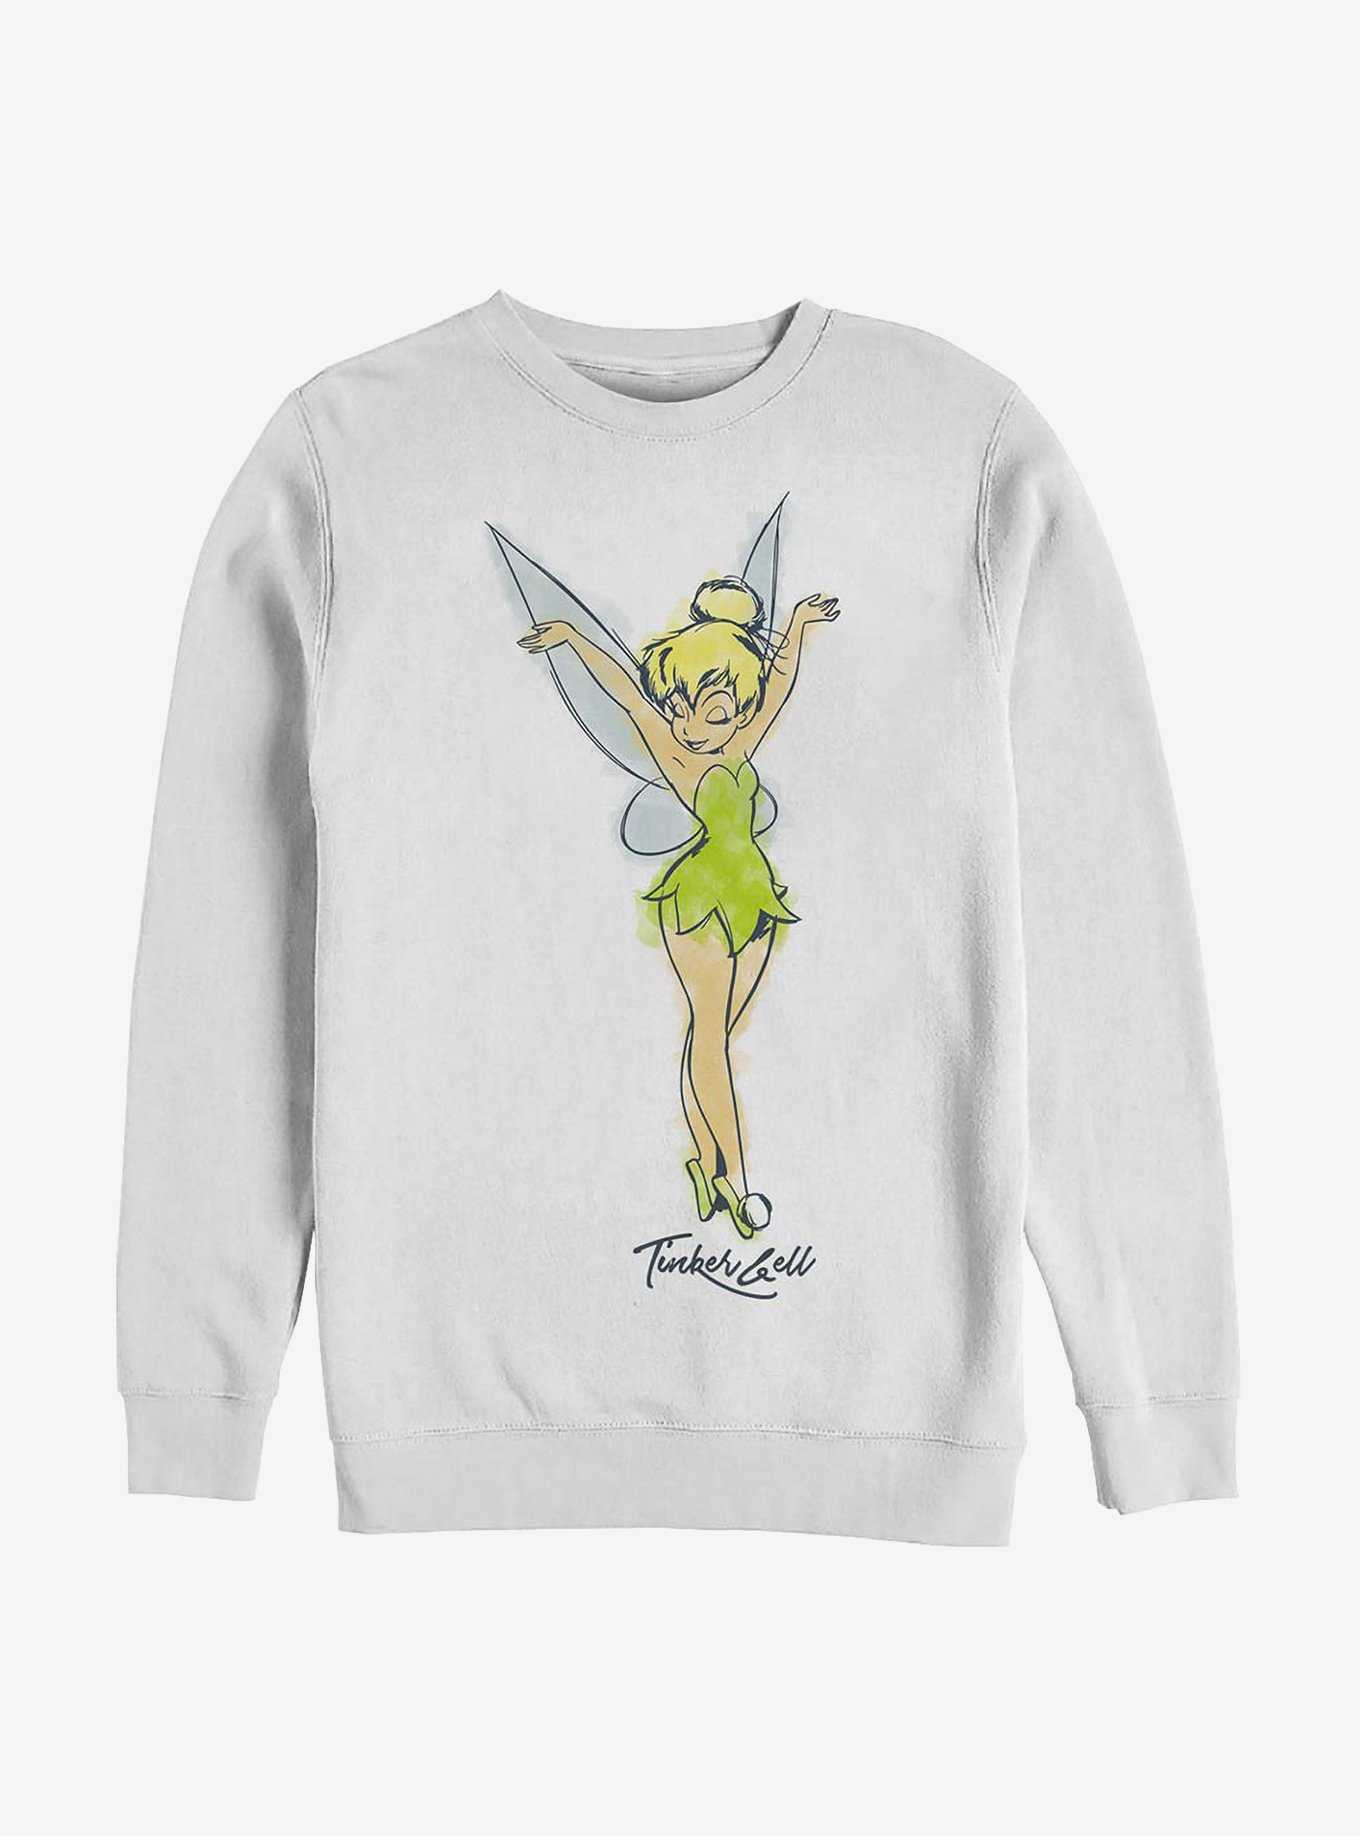 OFFICIAL Peter Pan Merchandise, Shirts & More | Topic Hot